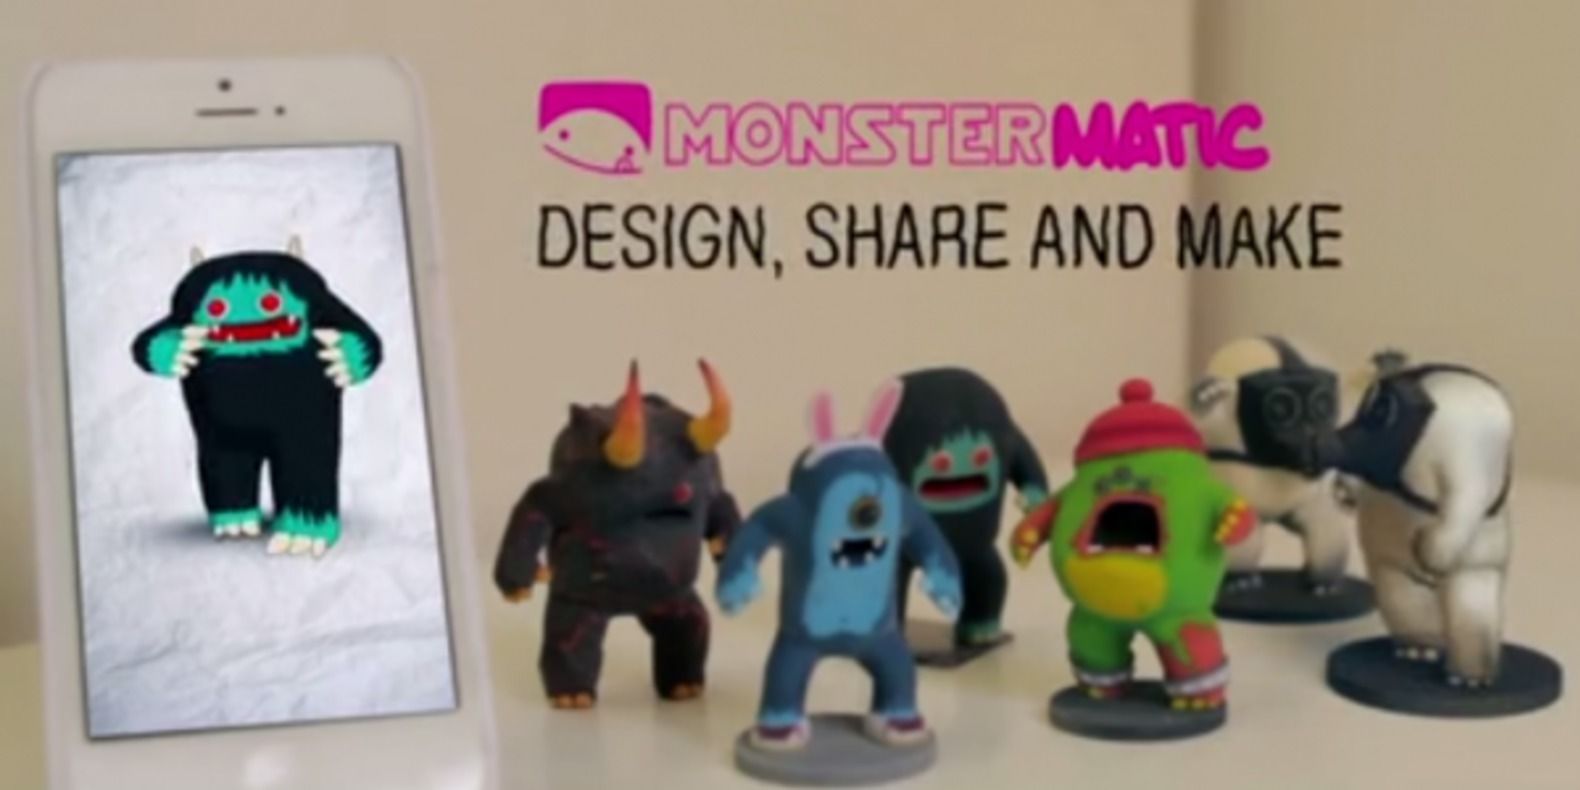 Monstermatic, monsters to customize and print in 3D